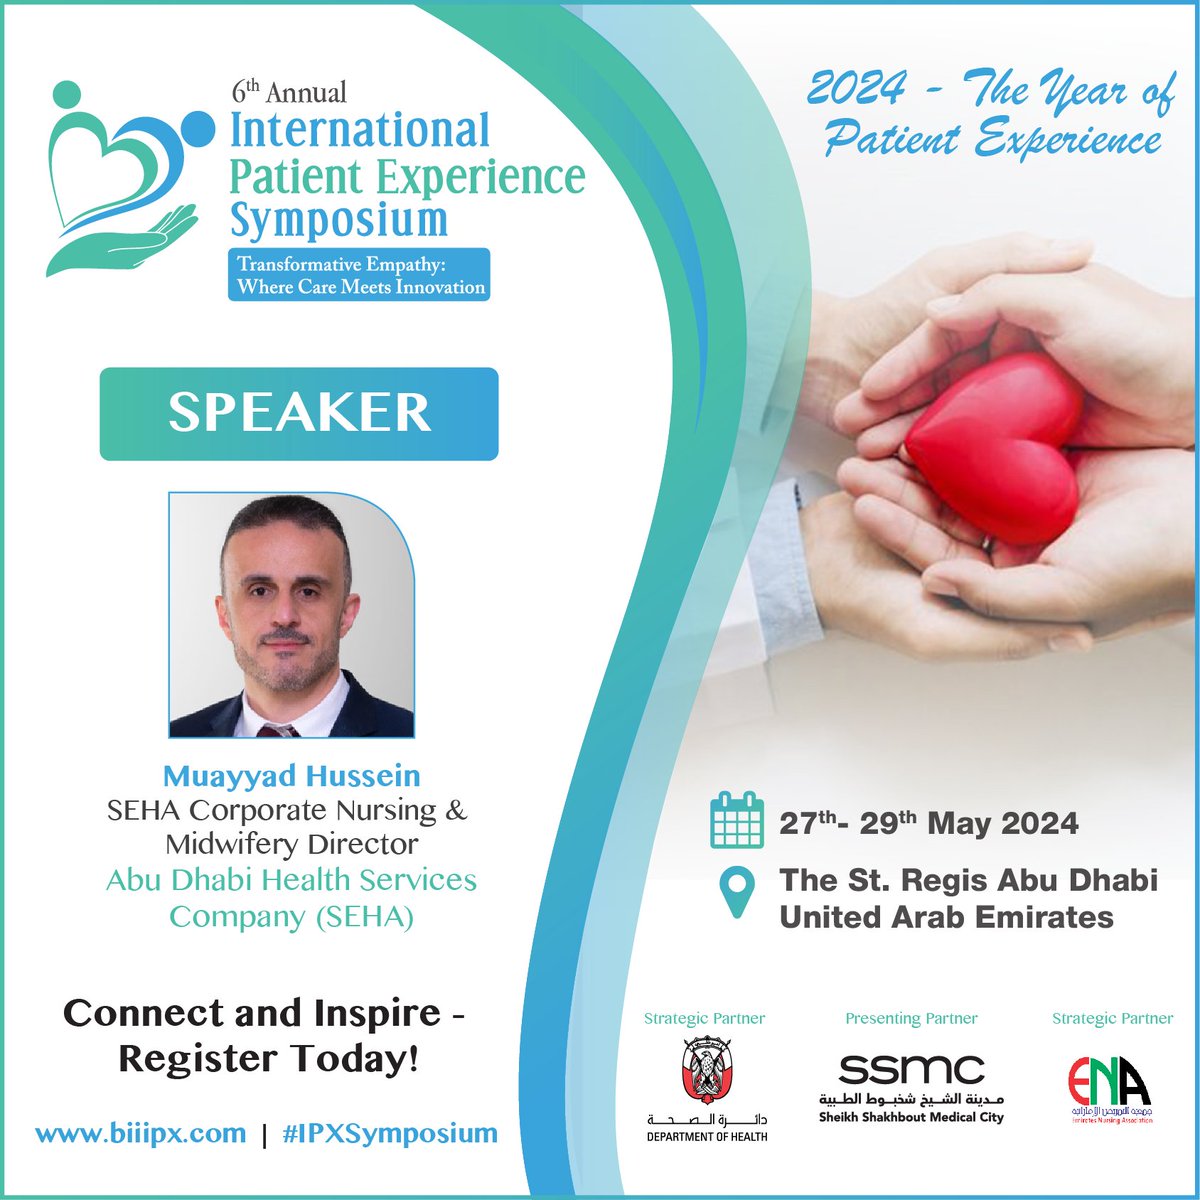 🌟Meet Muayyad Mohammad Hussein, SEHA Corporate #Nursing & Midwifery Director at @SEHAHealth at the 6th Annual International #PatientExperience Symposium!
🔗 Register Now: biiipx.com/register
#IPXSymposium #IPX #PX2024 #HealthcareInnovation #PatientCare #healthcare